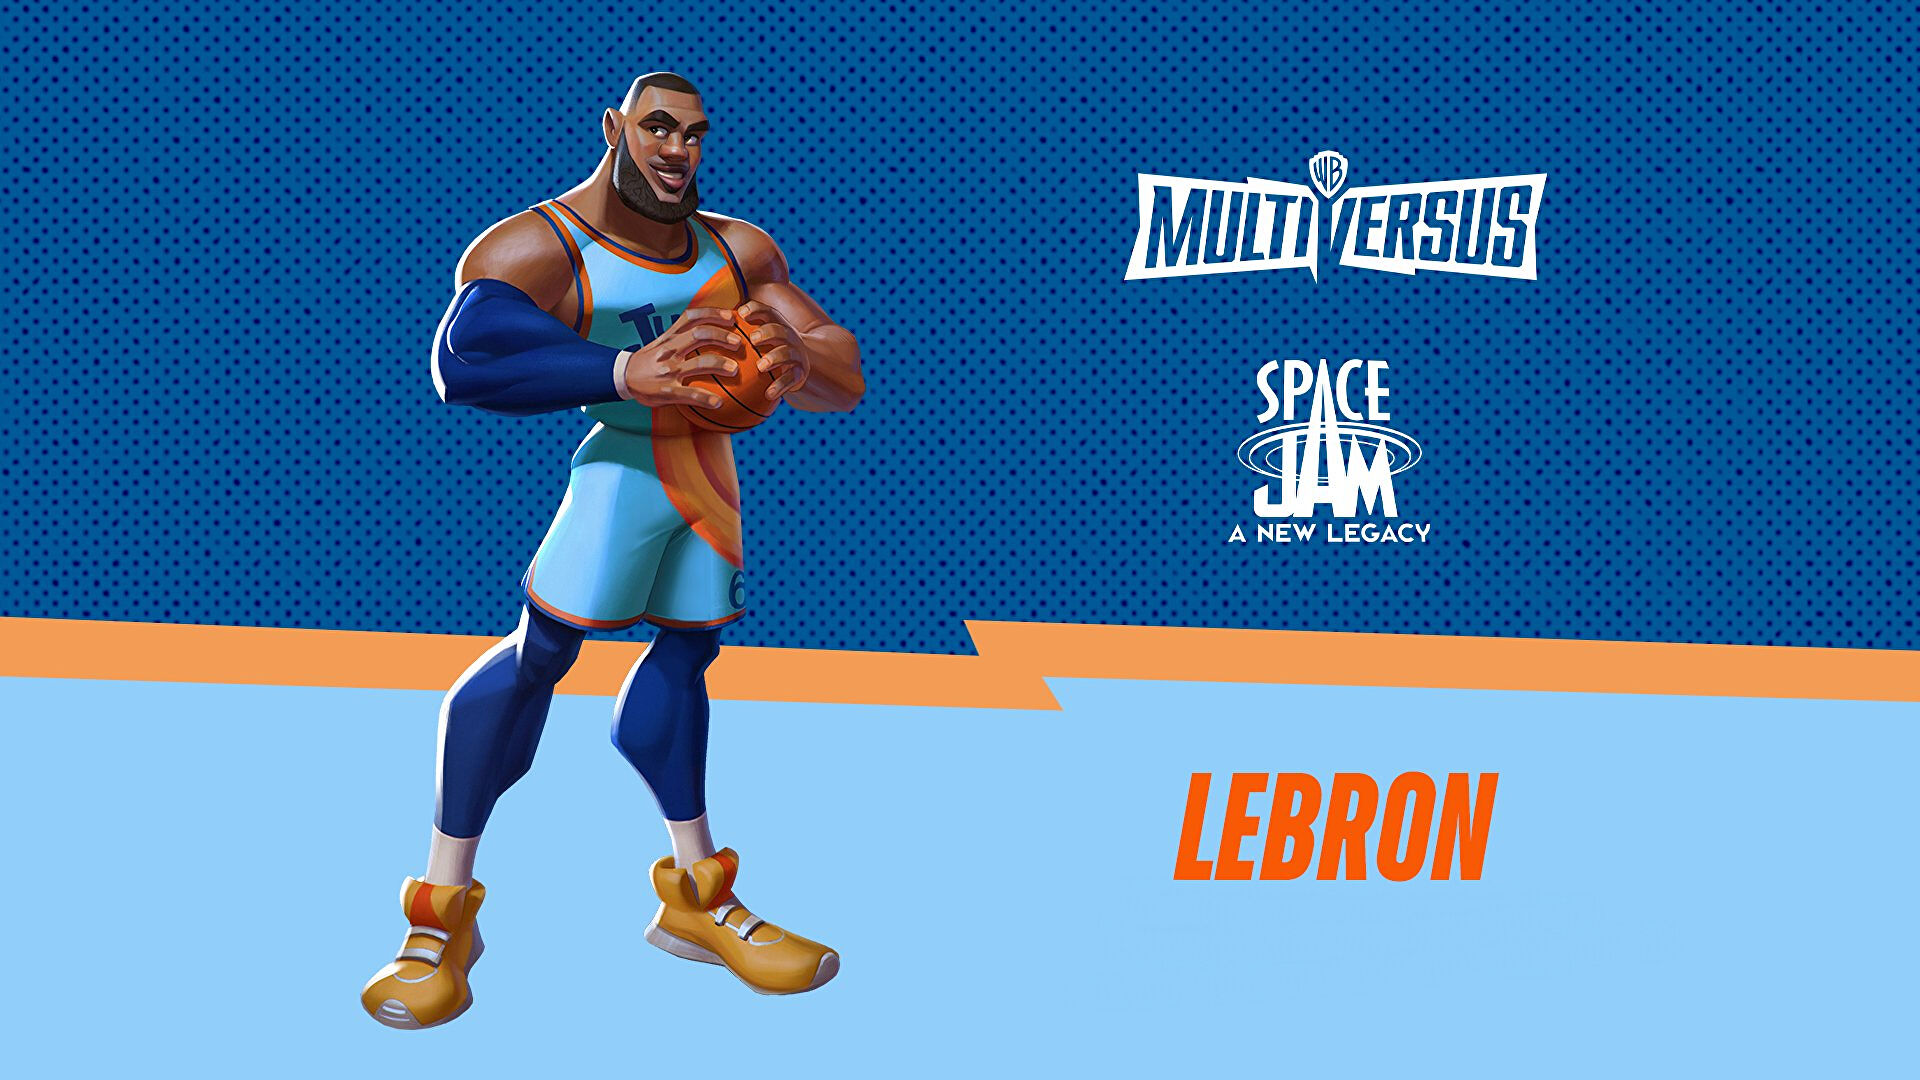 MultiVersus has temporarily removed LeBron James from the game